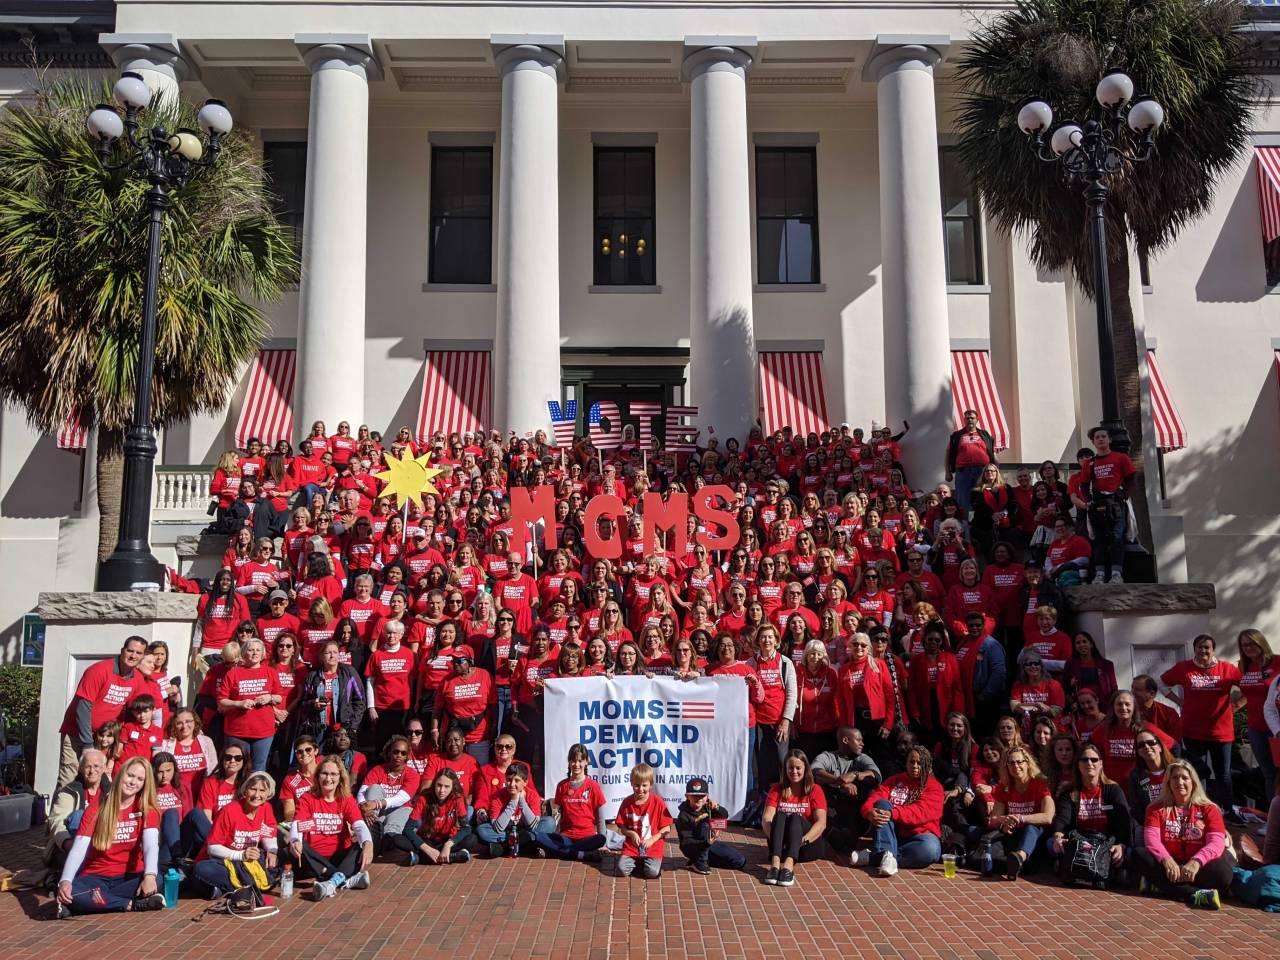 More than 400 Moms Demand Action volunteers, Students Demand Action leaders, and survivors of gun violence gathered in Tallahassee today to discuss gun violence prevention and urge legislators to act.
If you’re ready to get involved and make a...